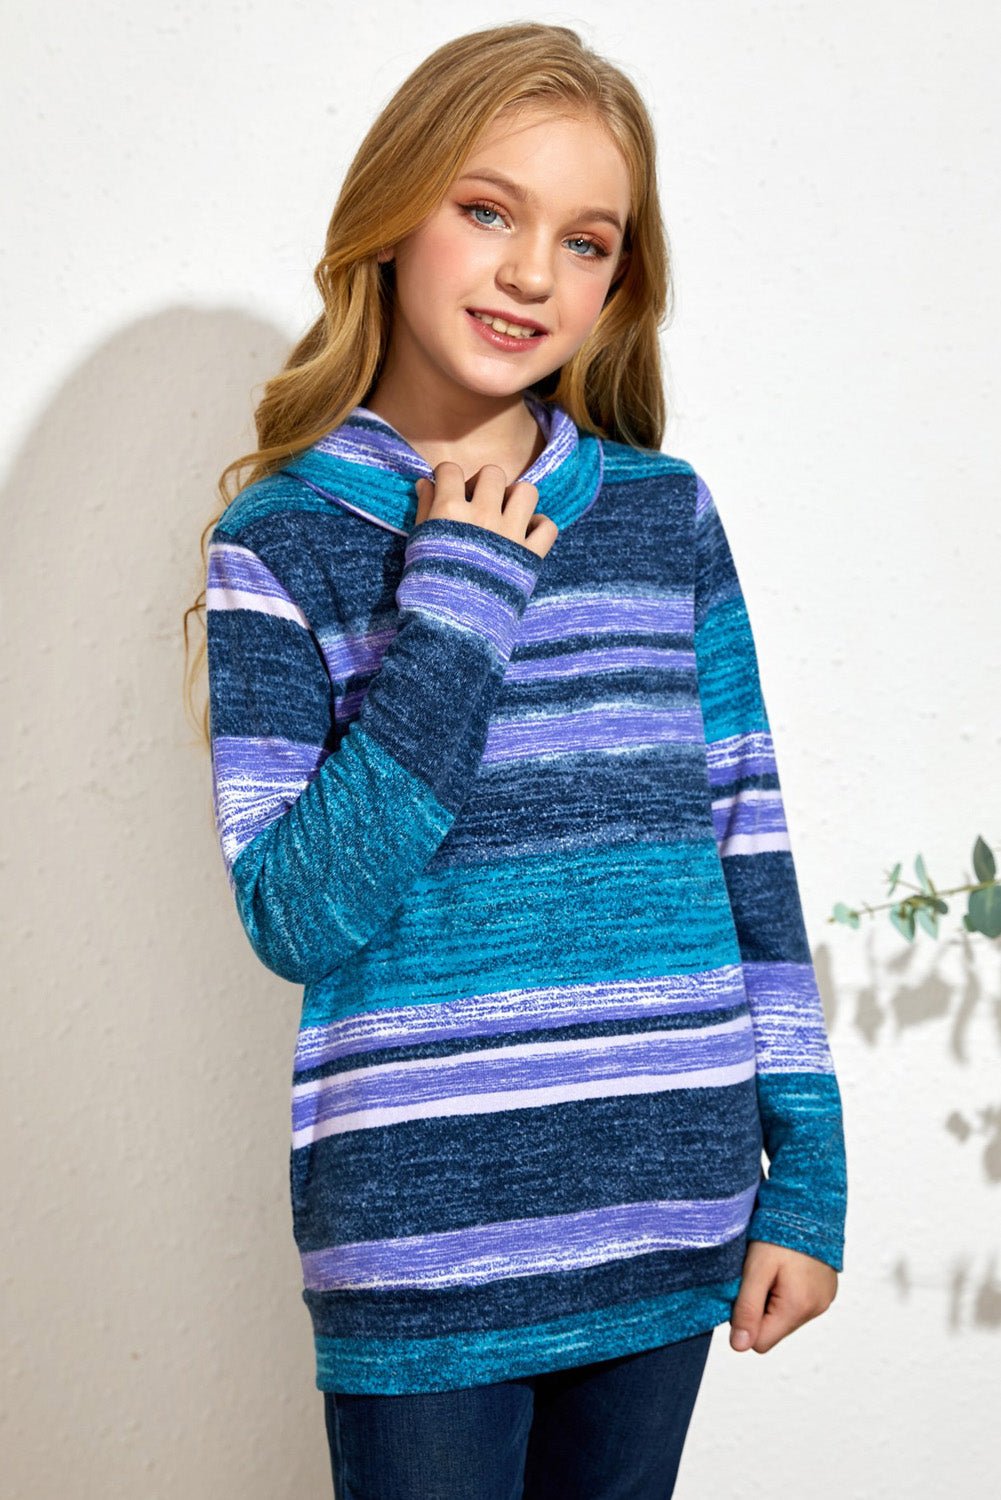 Girls Striped Cowl Neck Top with Pockets - Fashion Girl Online Store